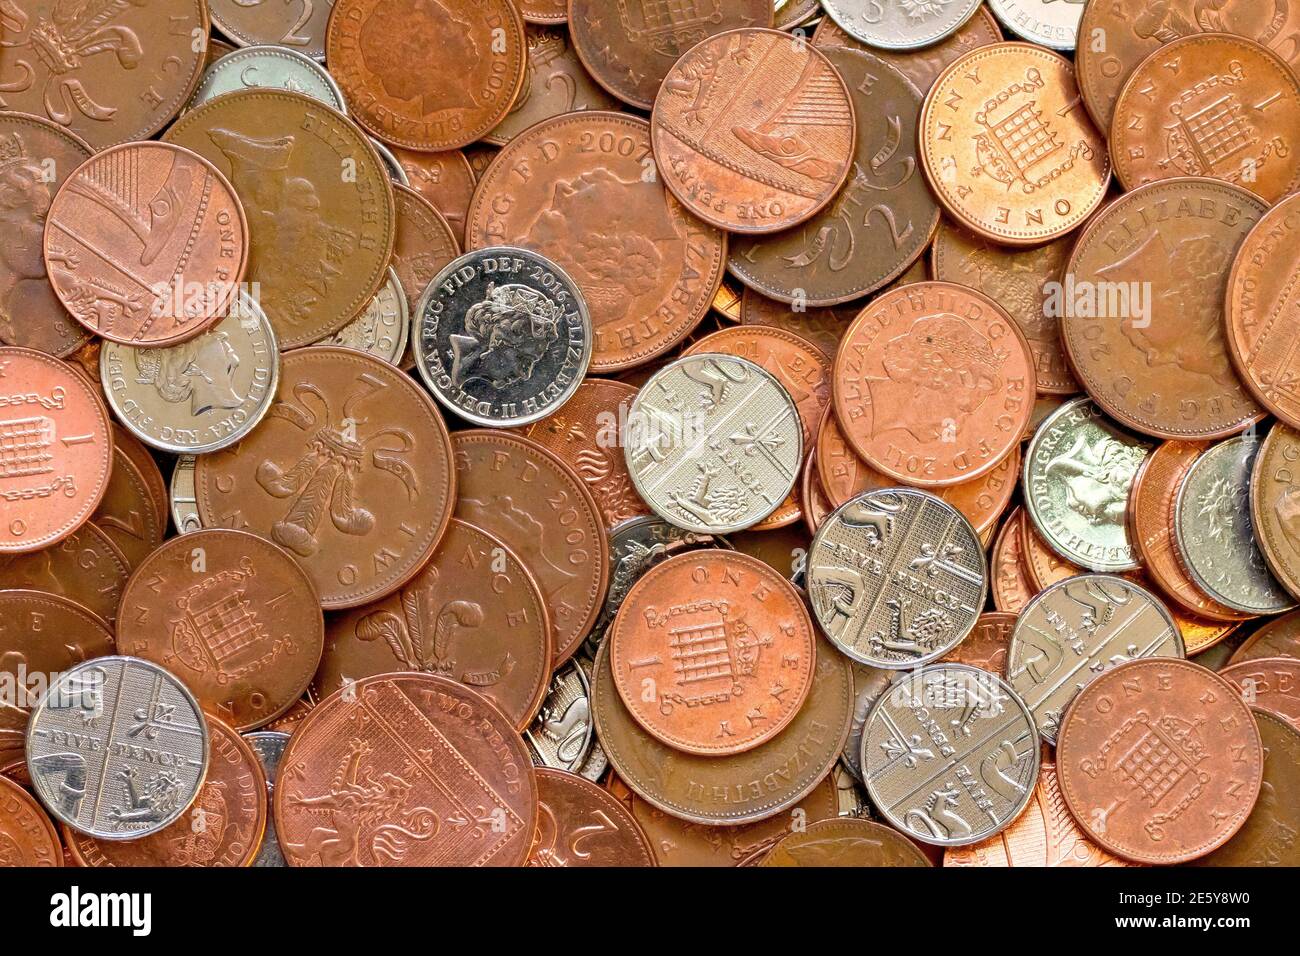 Close up of a collection of low denomination UK decimal coins, namely pennies, two pences and five pences. Stock Photo